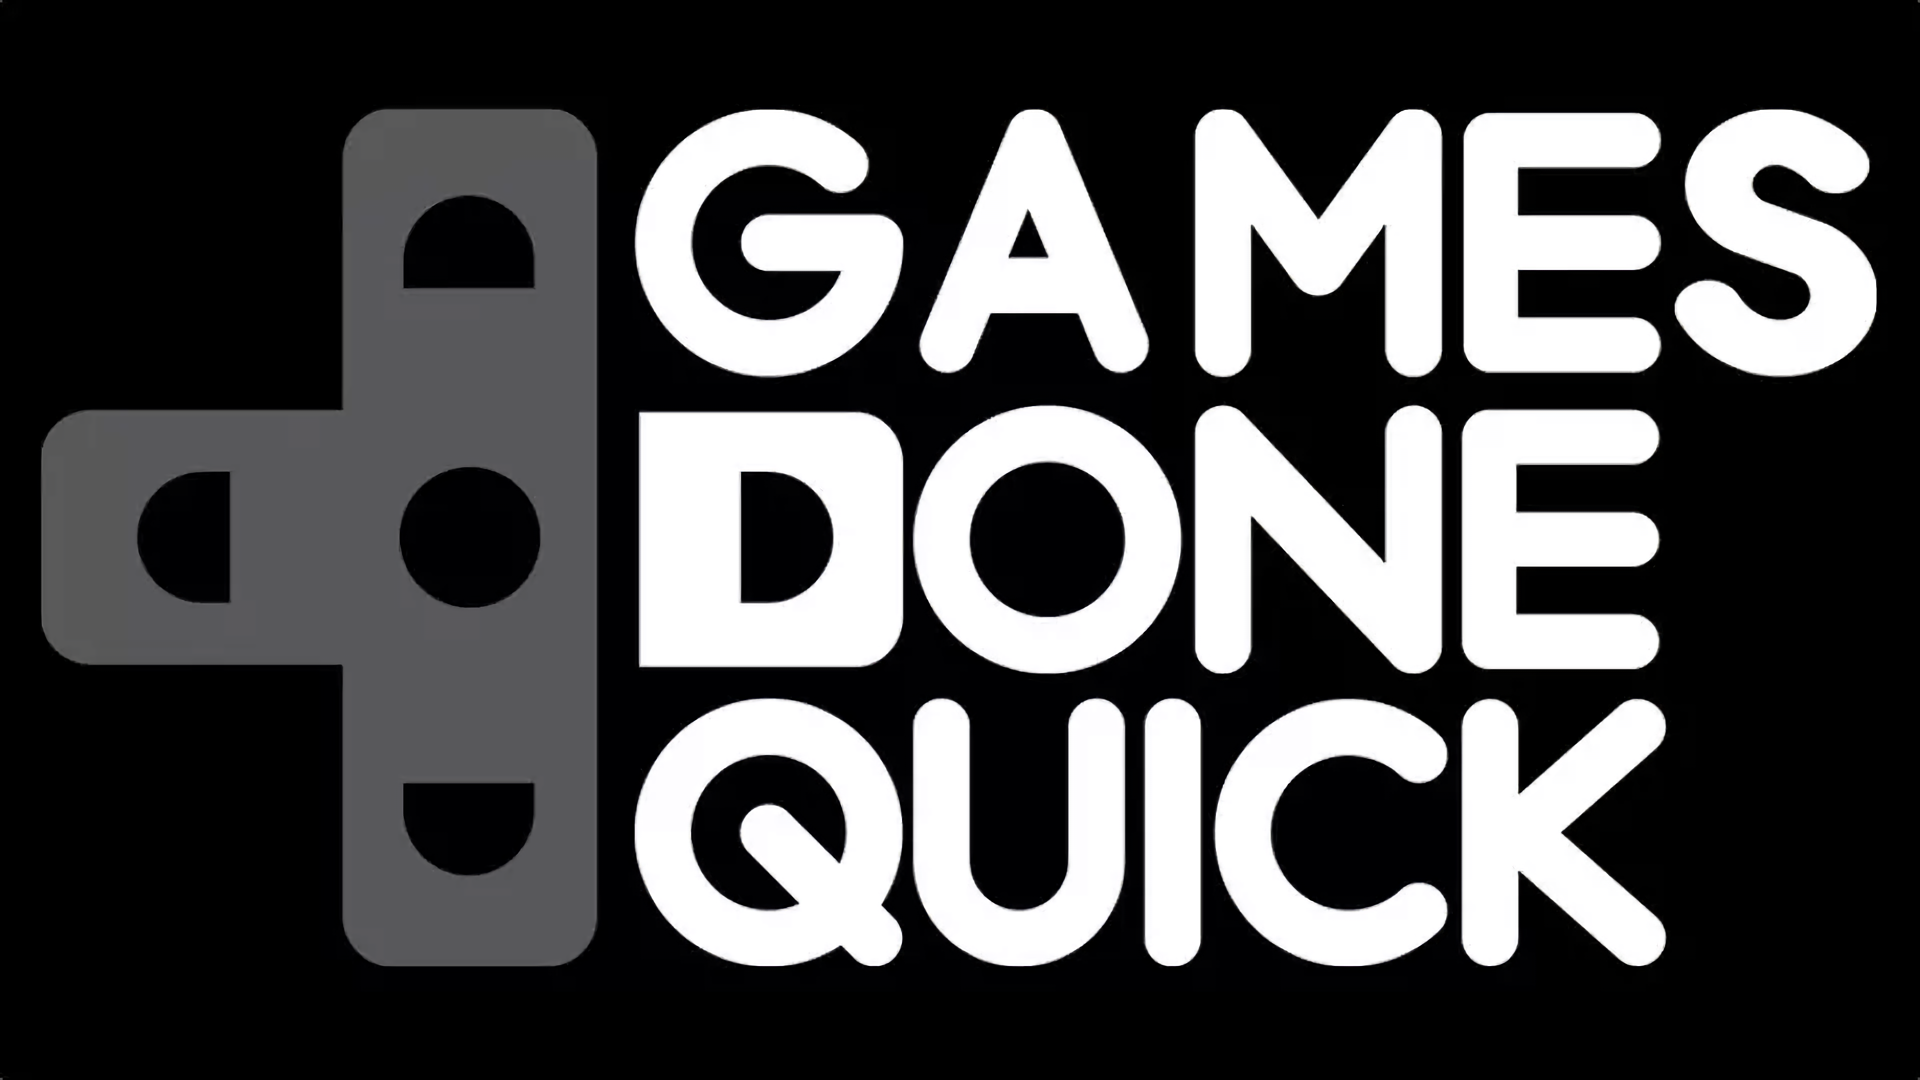 Awesome Games Done Quick 2021 is in full swing